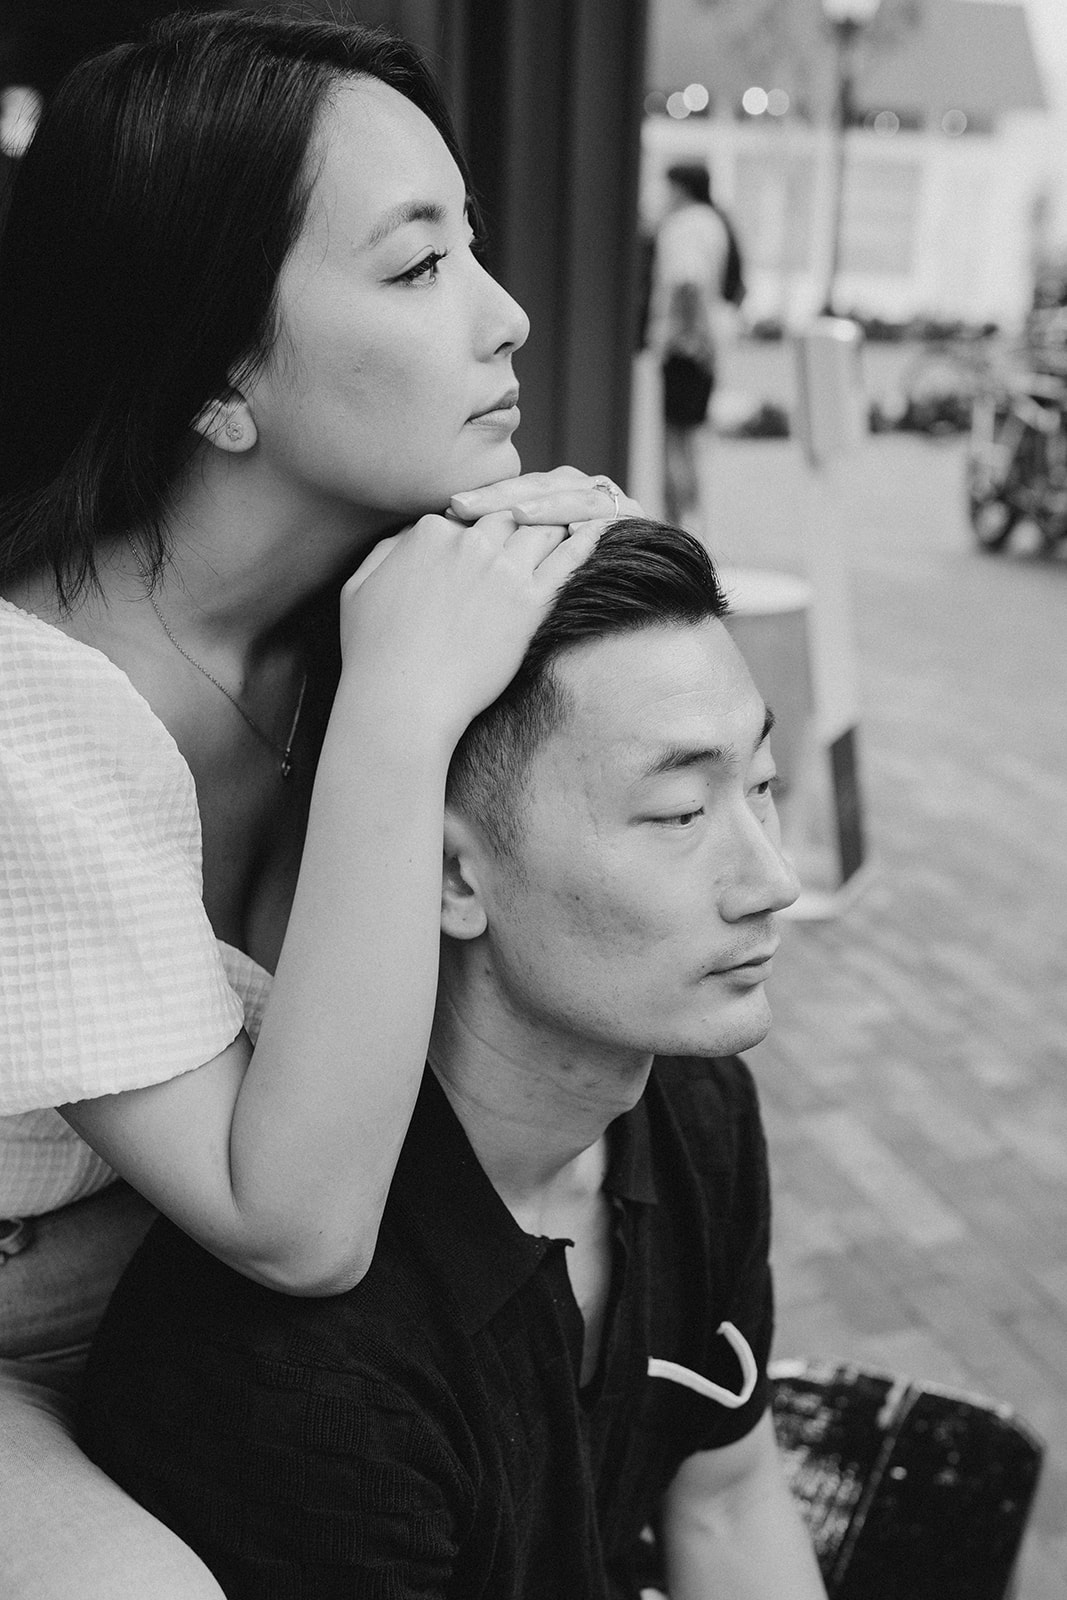 black and white photo of couple, with girl's chin and hands on top of guy's head